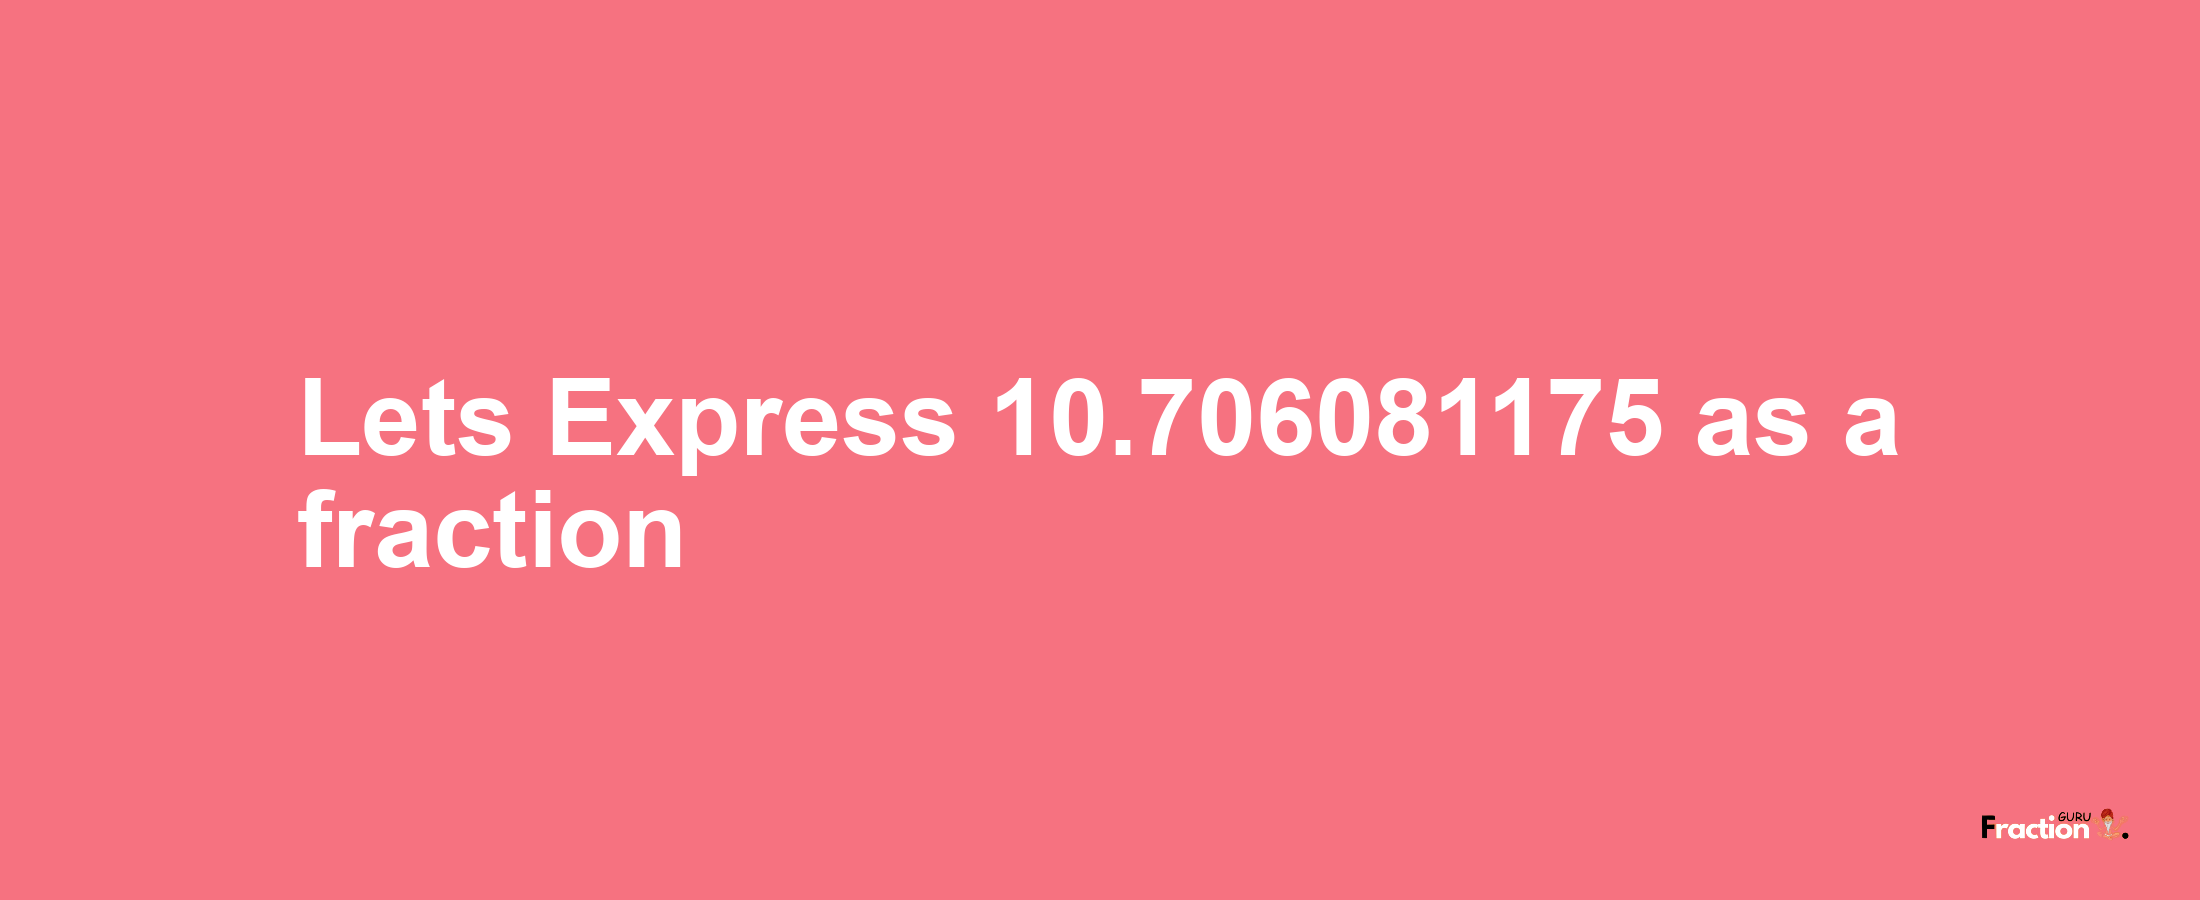 Lets Express 10.706081175 as afraction